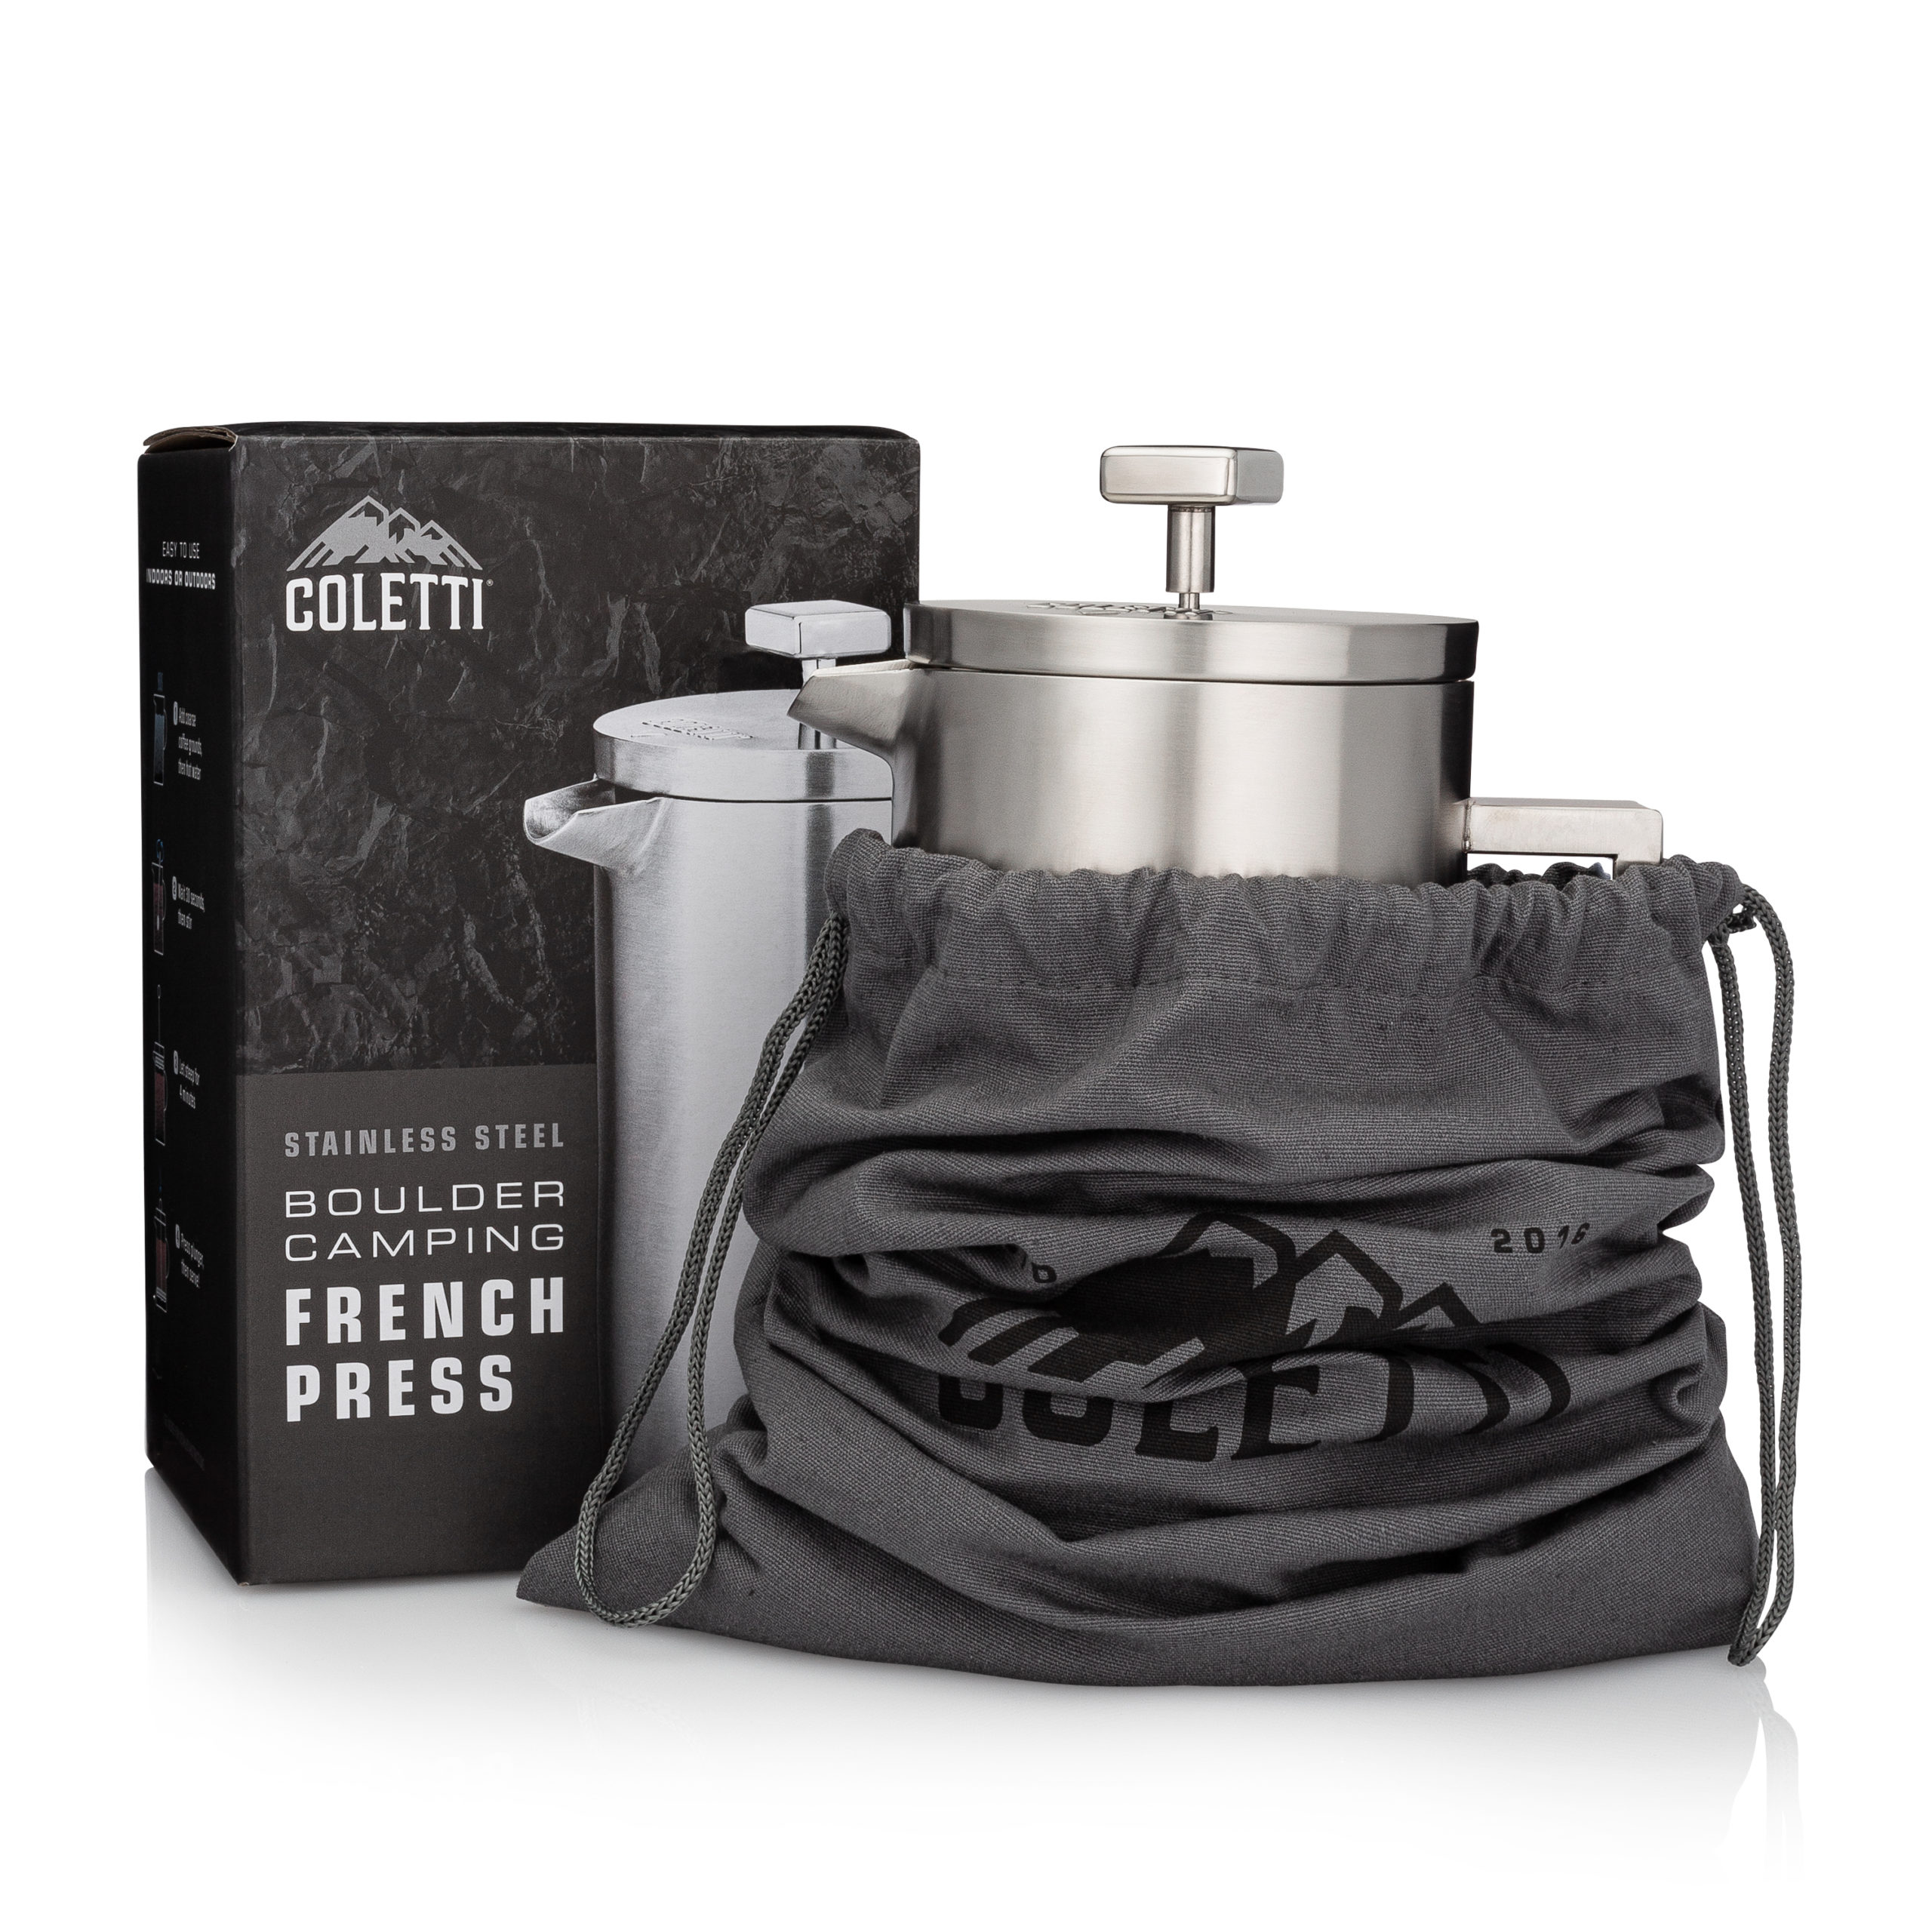  COLETTI Birthday Gifts for Men - Classic Percolator Bundle -  Camping Coffee Pot : Sports & Outdoors